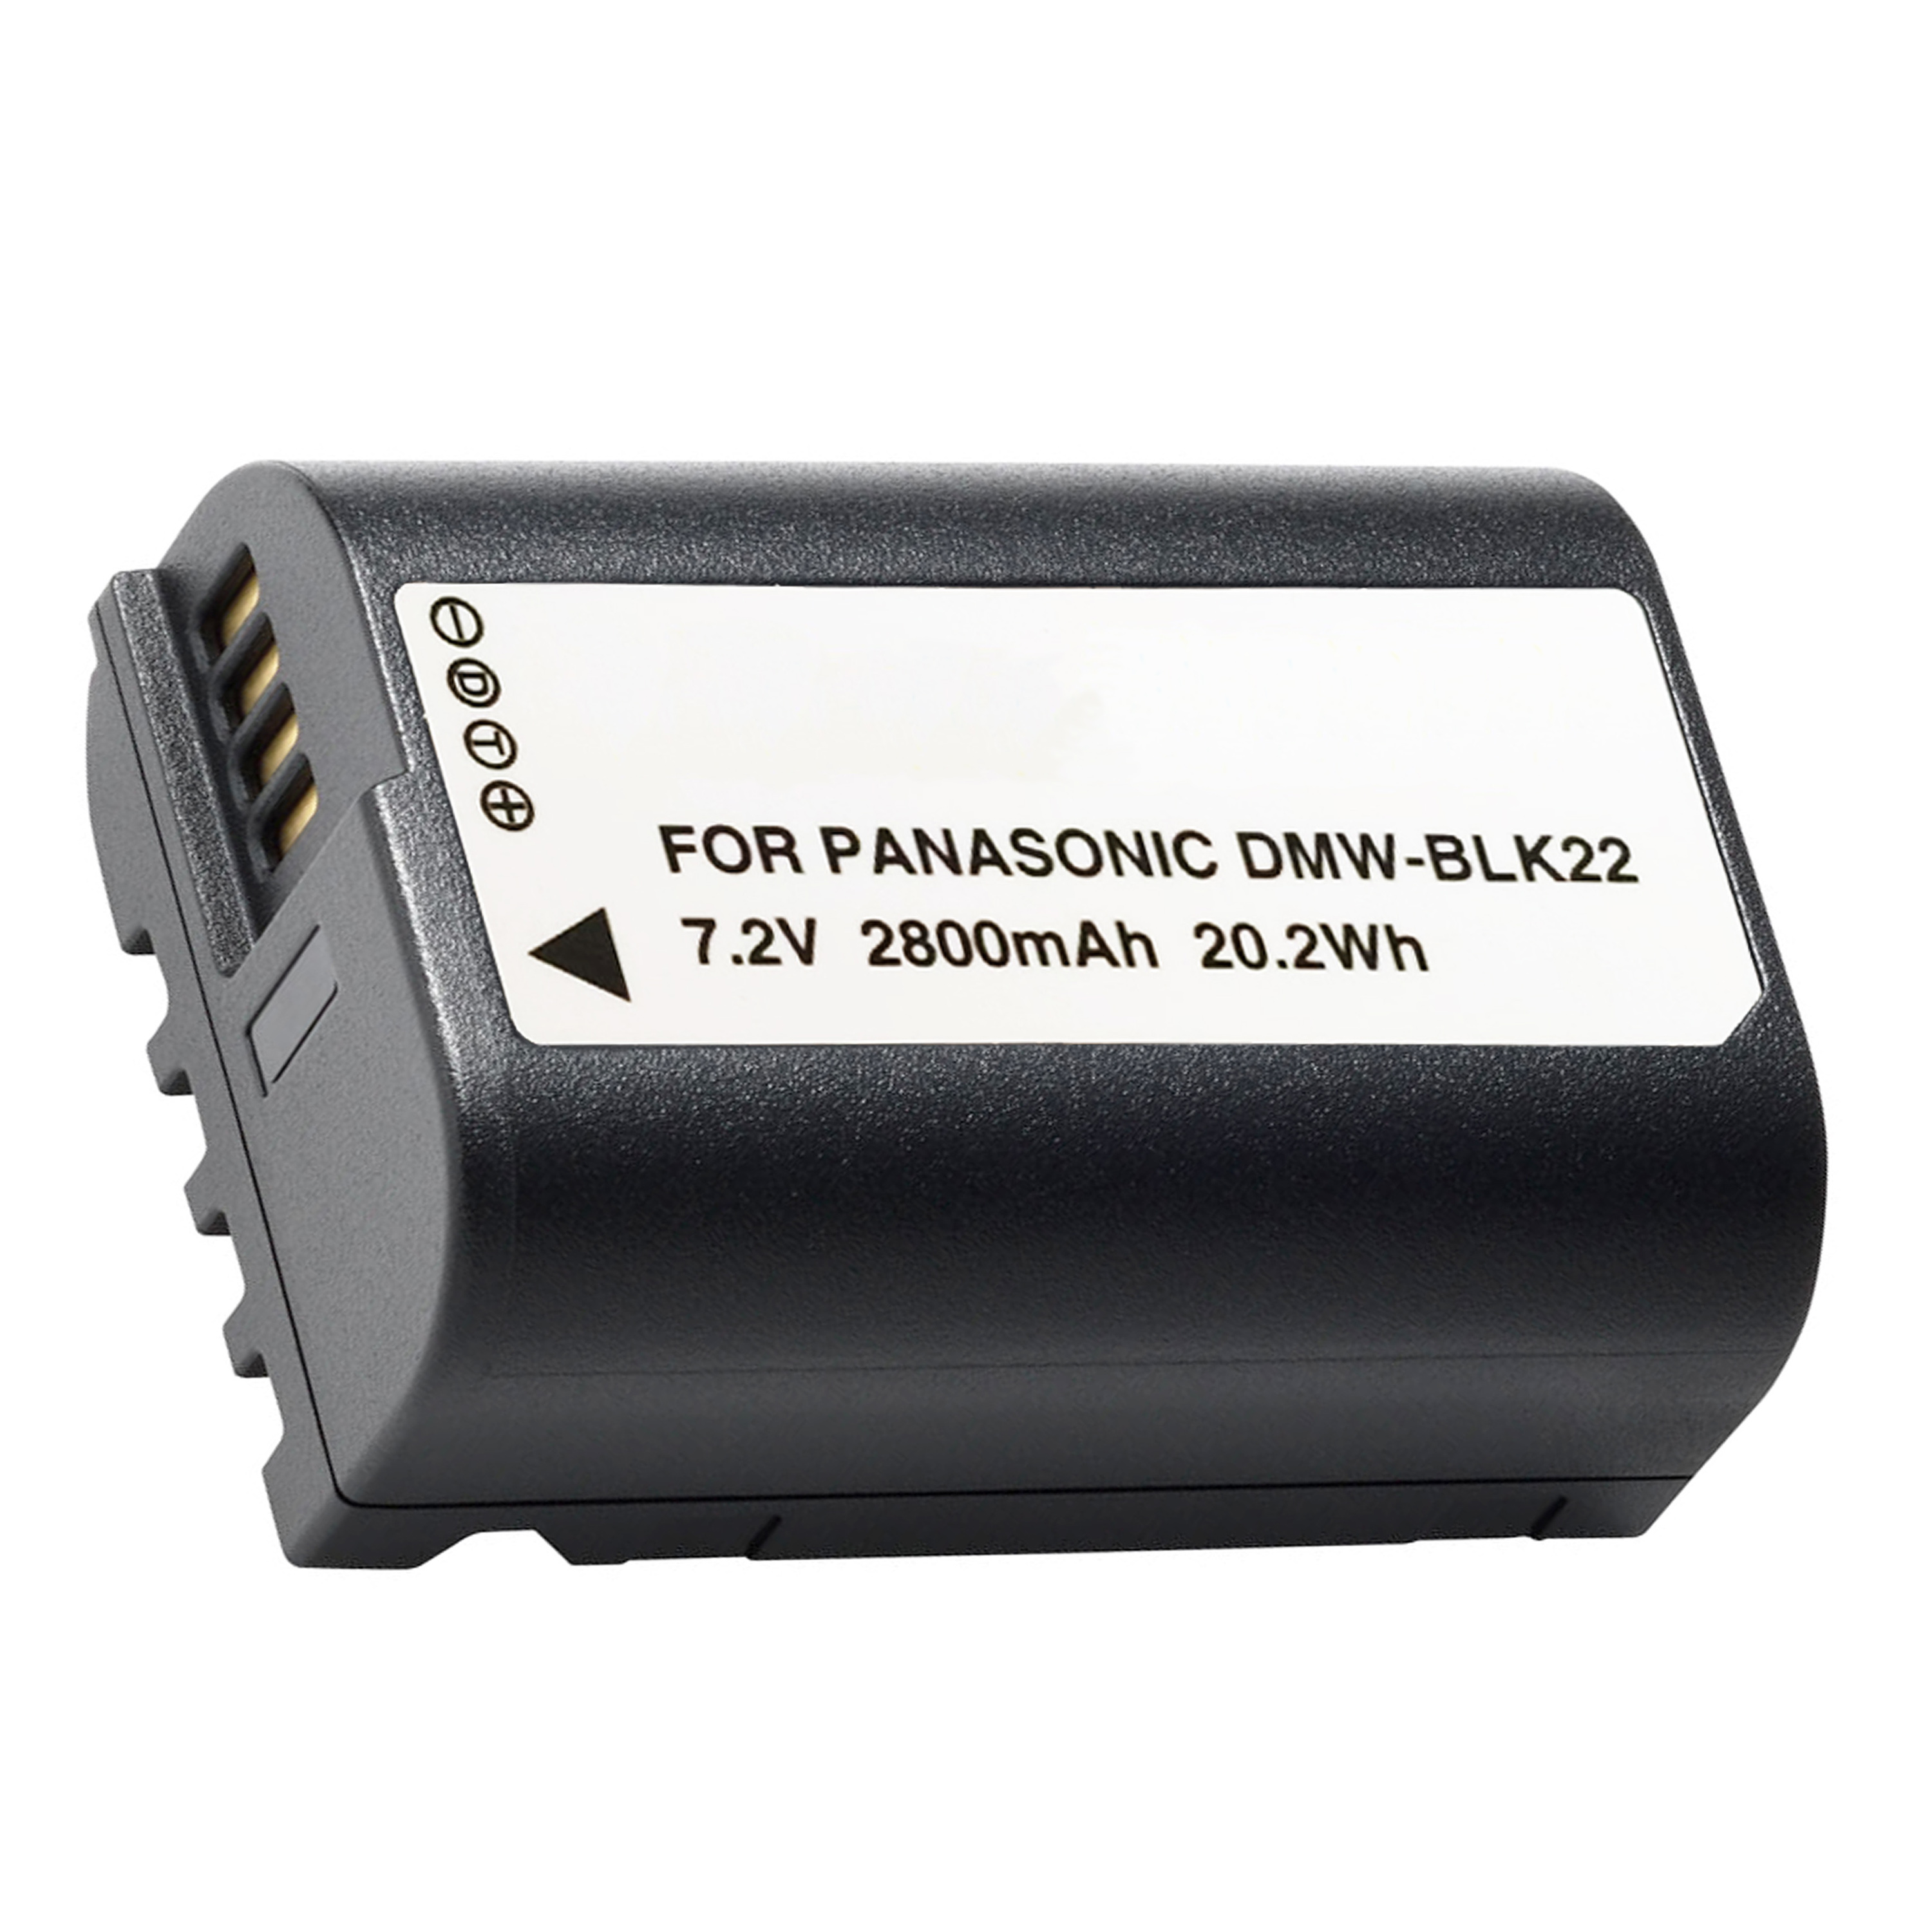 Synergy Digital Camera Battery, Compatible with Panasonic DMW-BLK22 Digital Camera Battery (7.2V, Li-ion, 2800mAh)